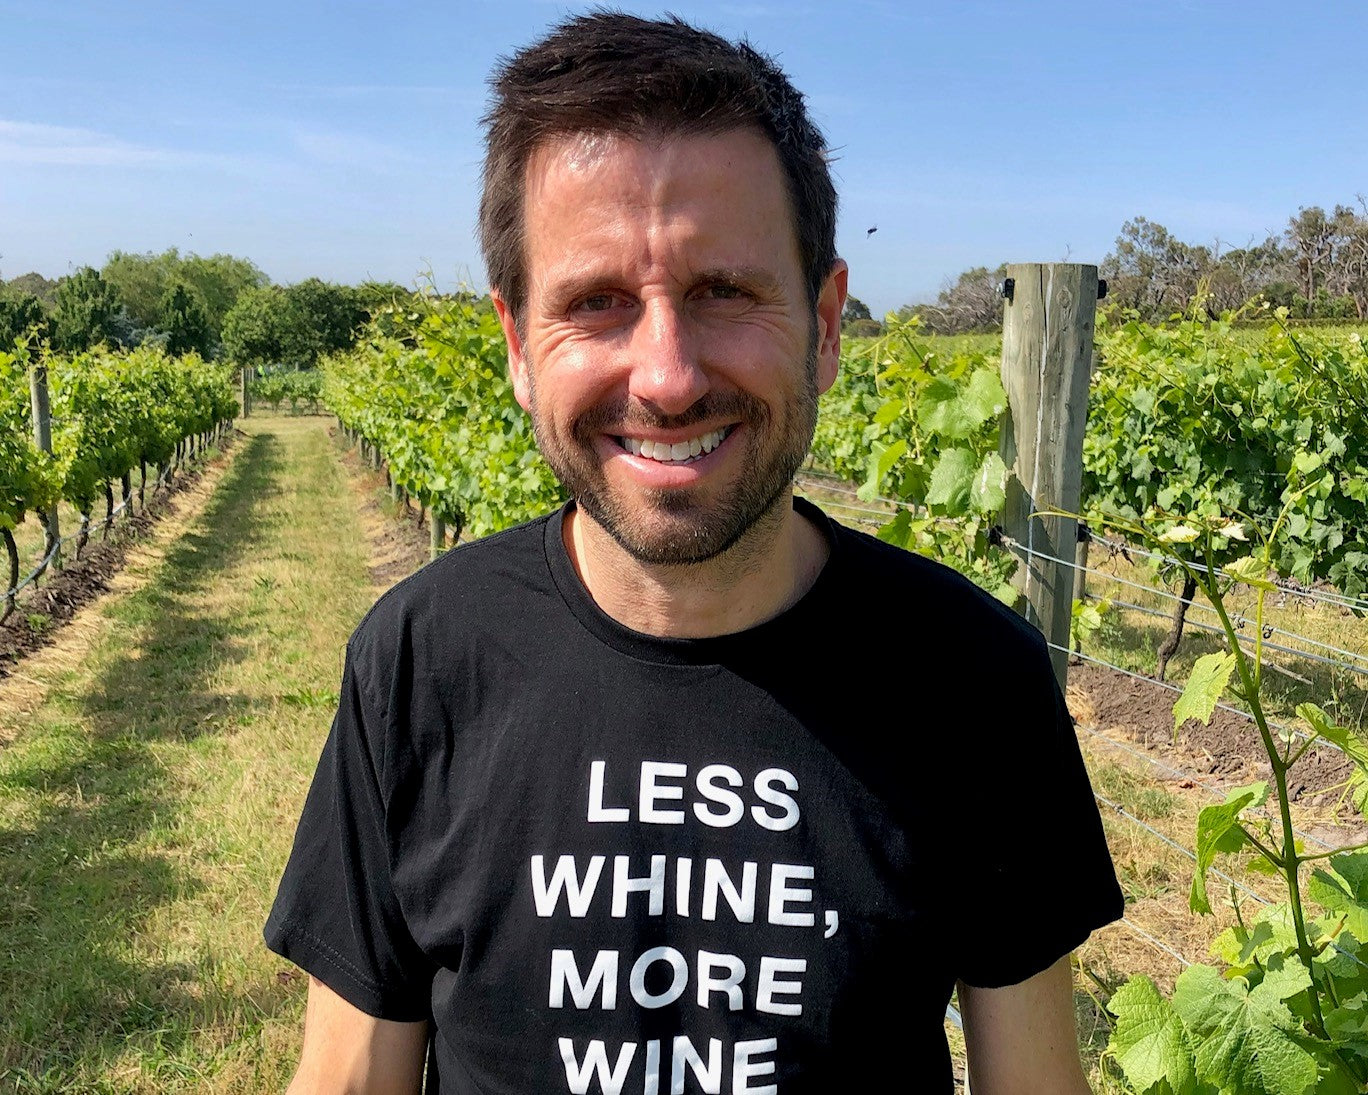 Less whine more wine quote